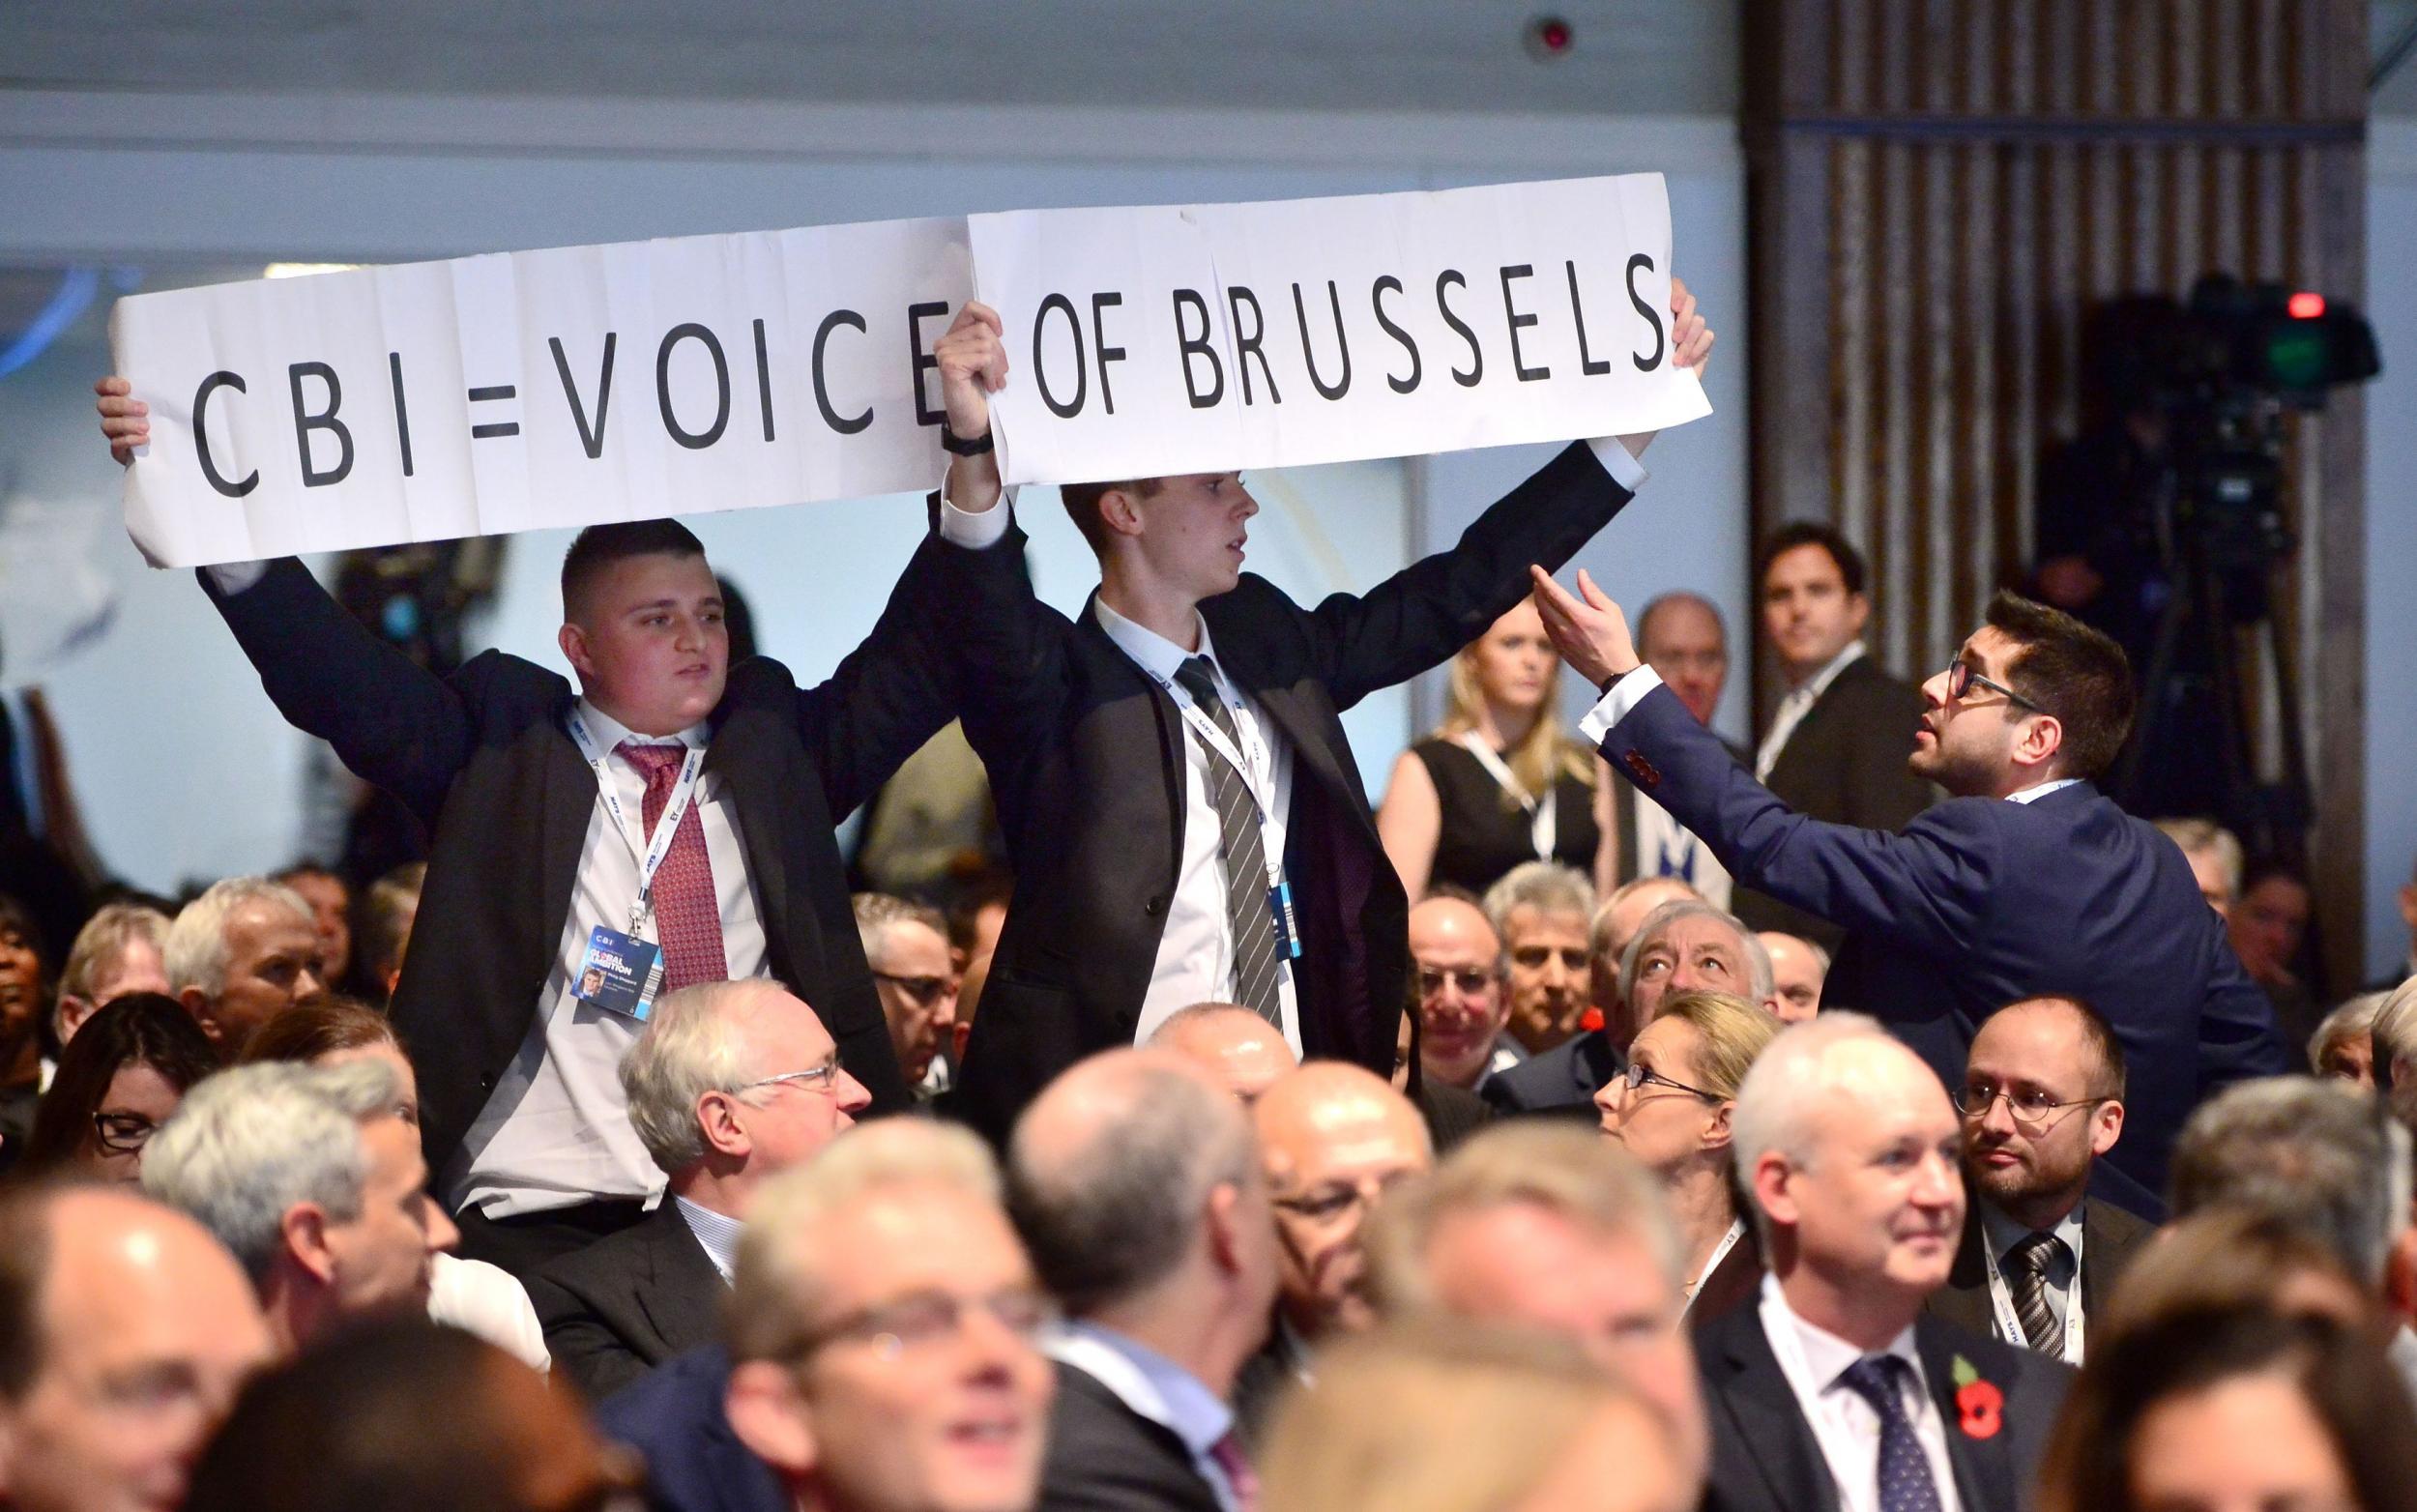 Anti-EU protesters interrupt the PM during his speech to the CBI in central London